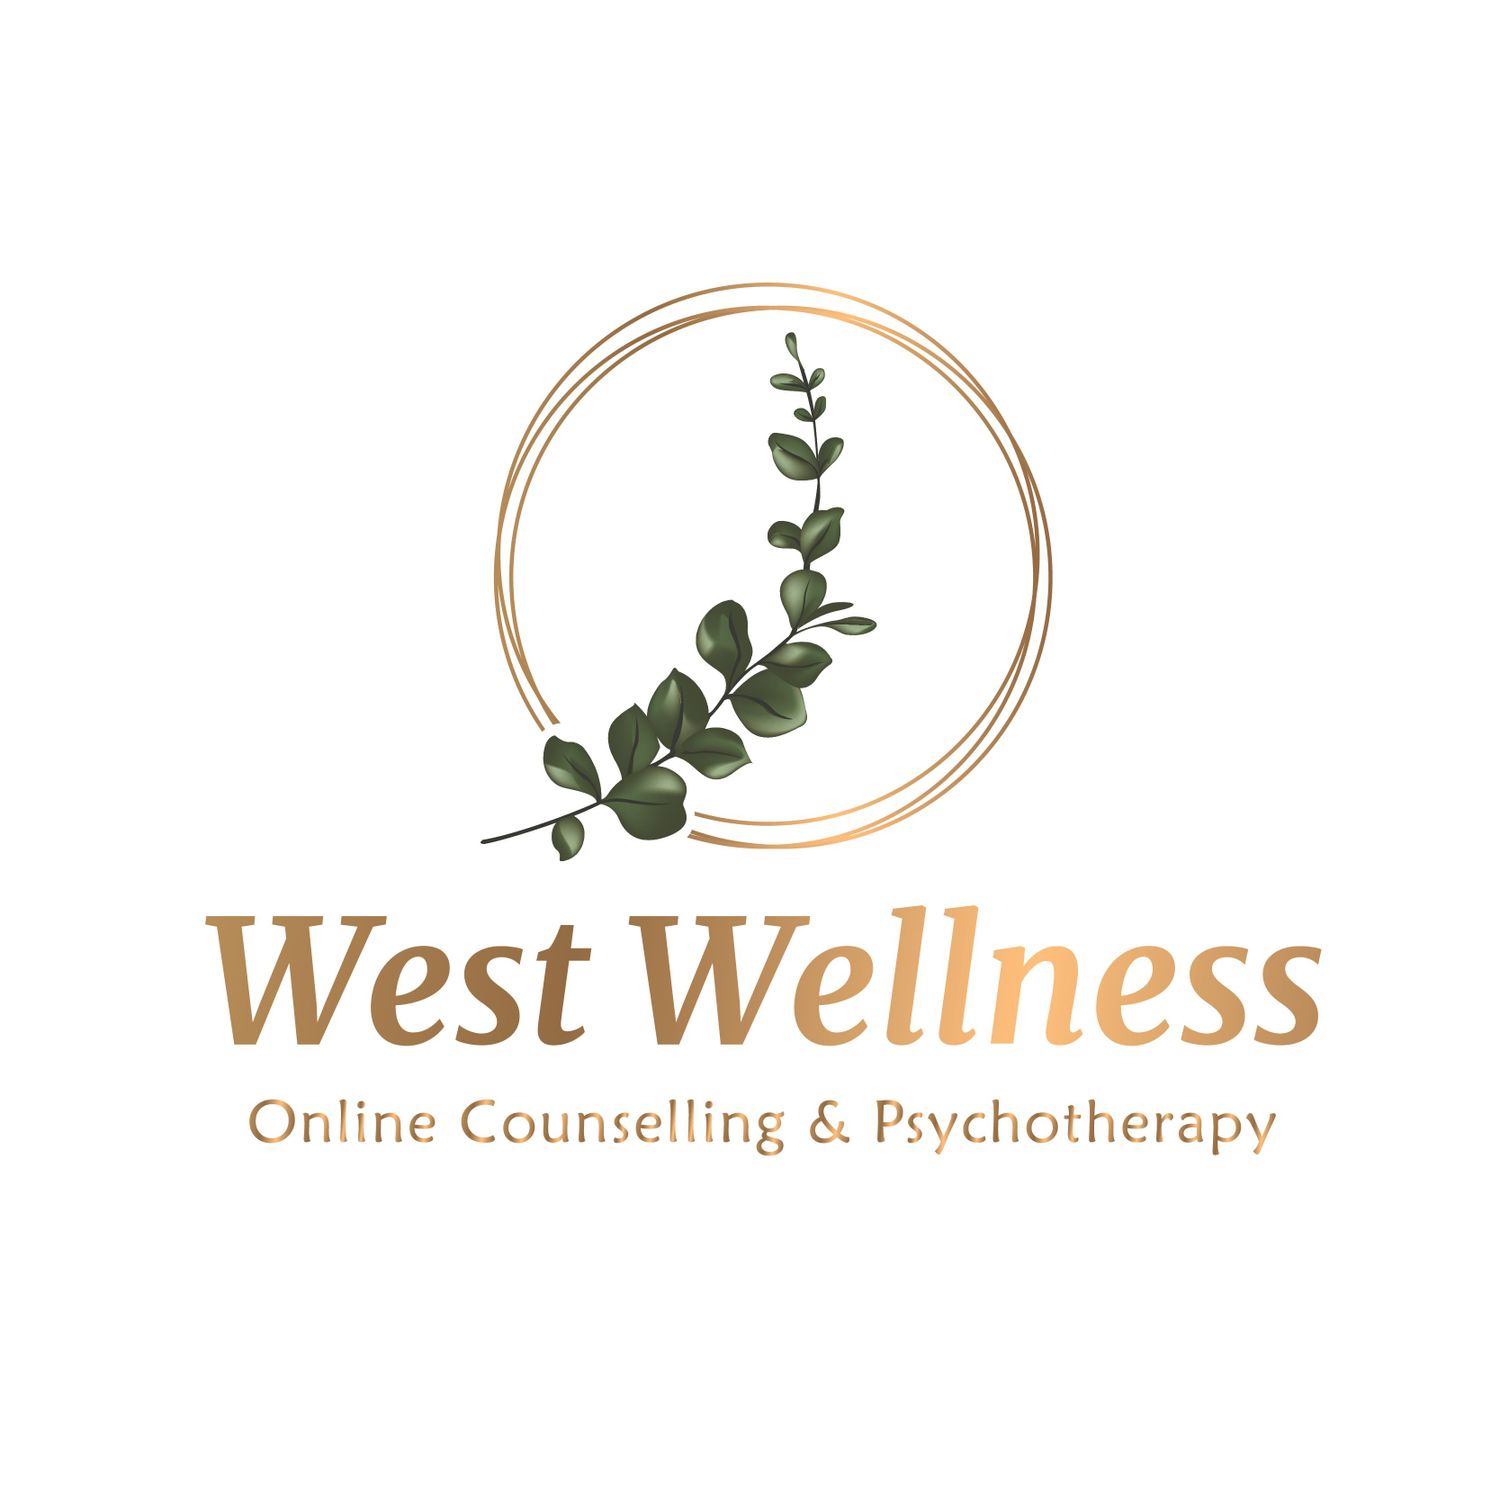 Gallery Photo of Online Counselling & Psychotherapy from the comfort of your own home!